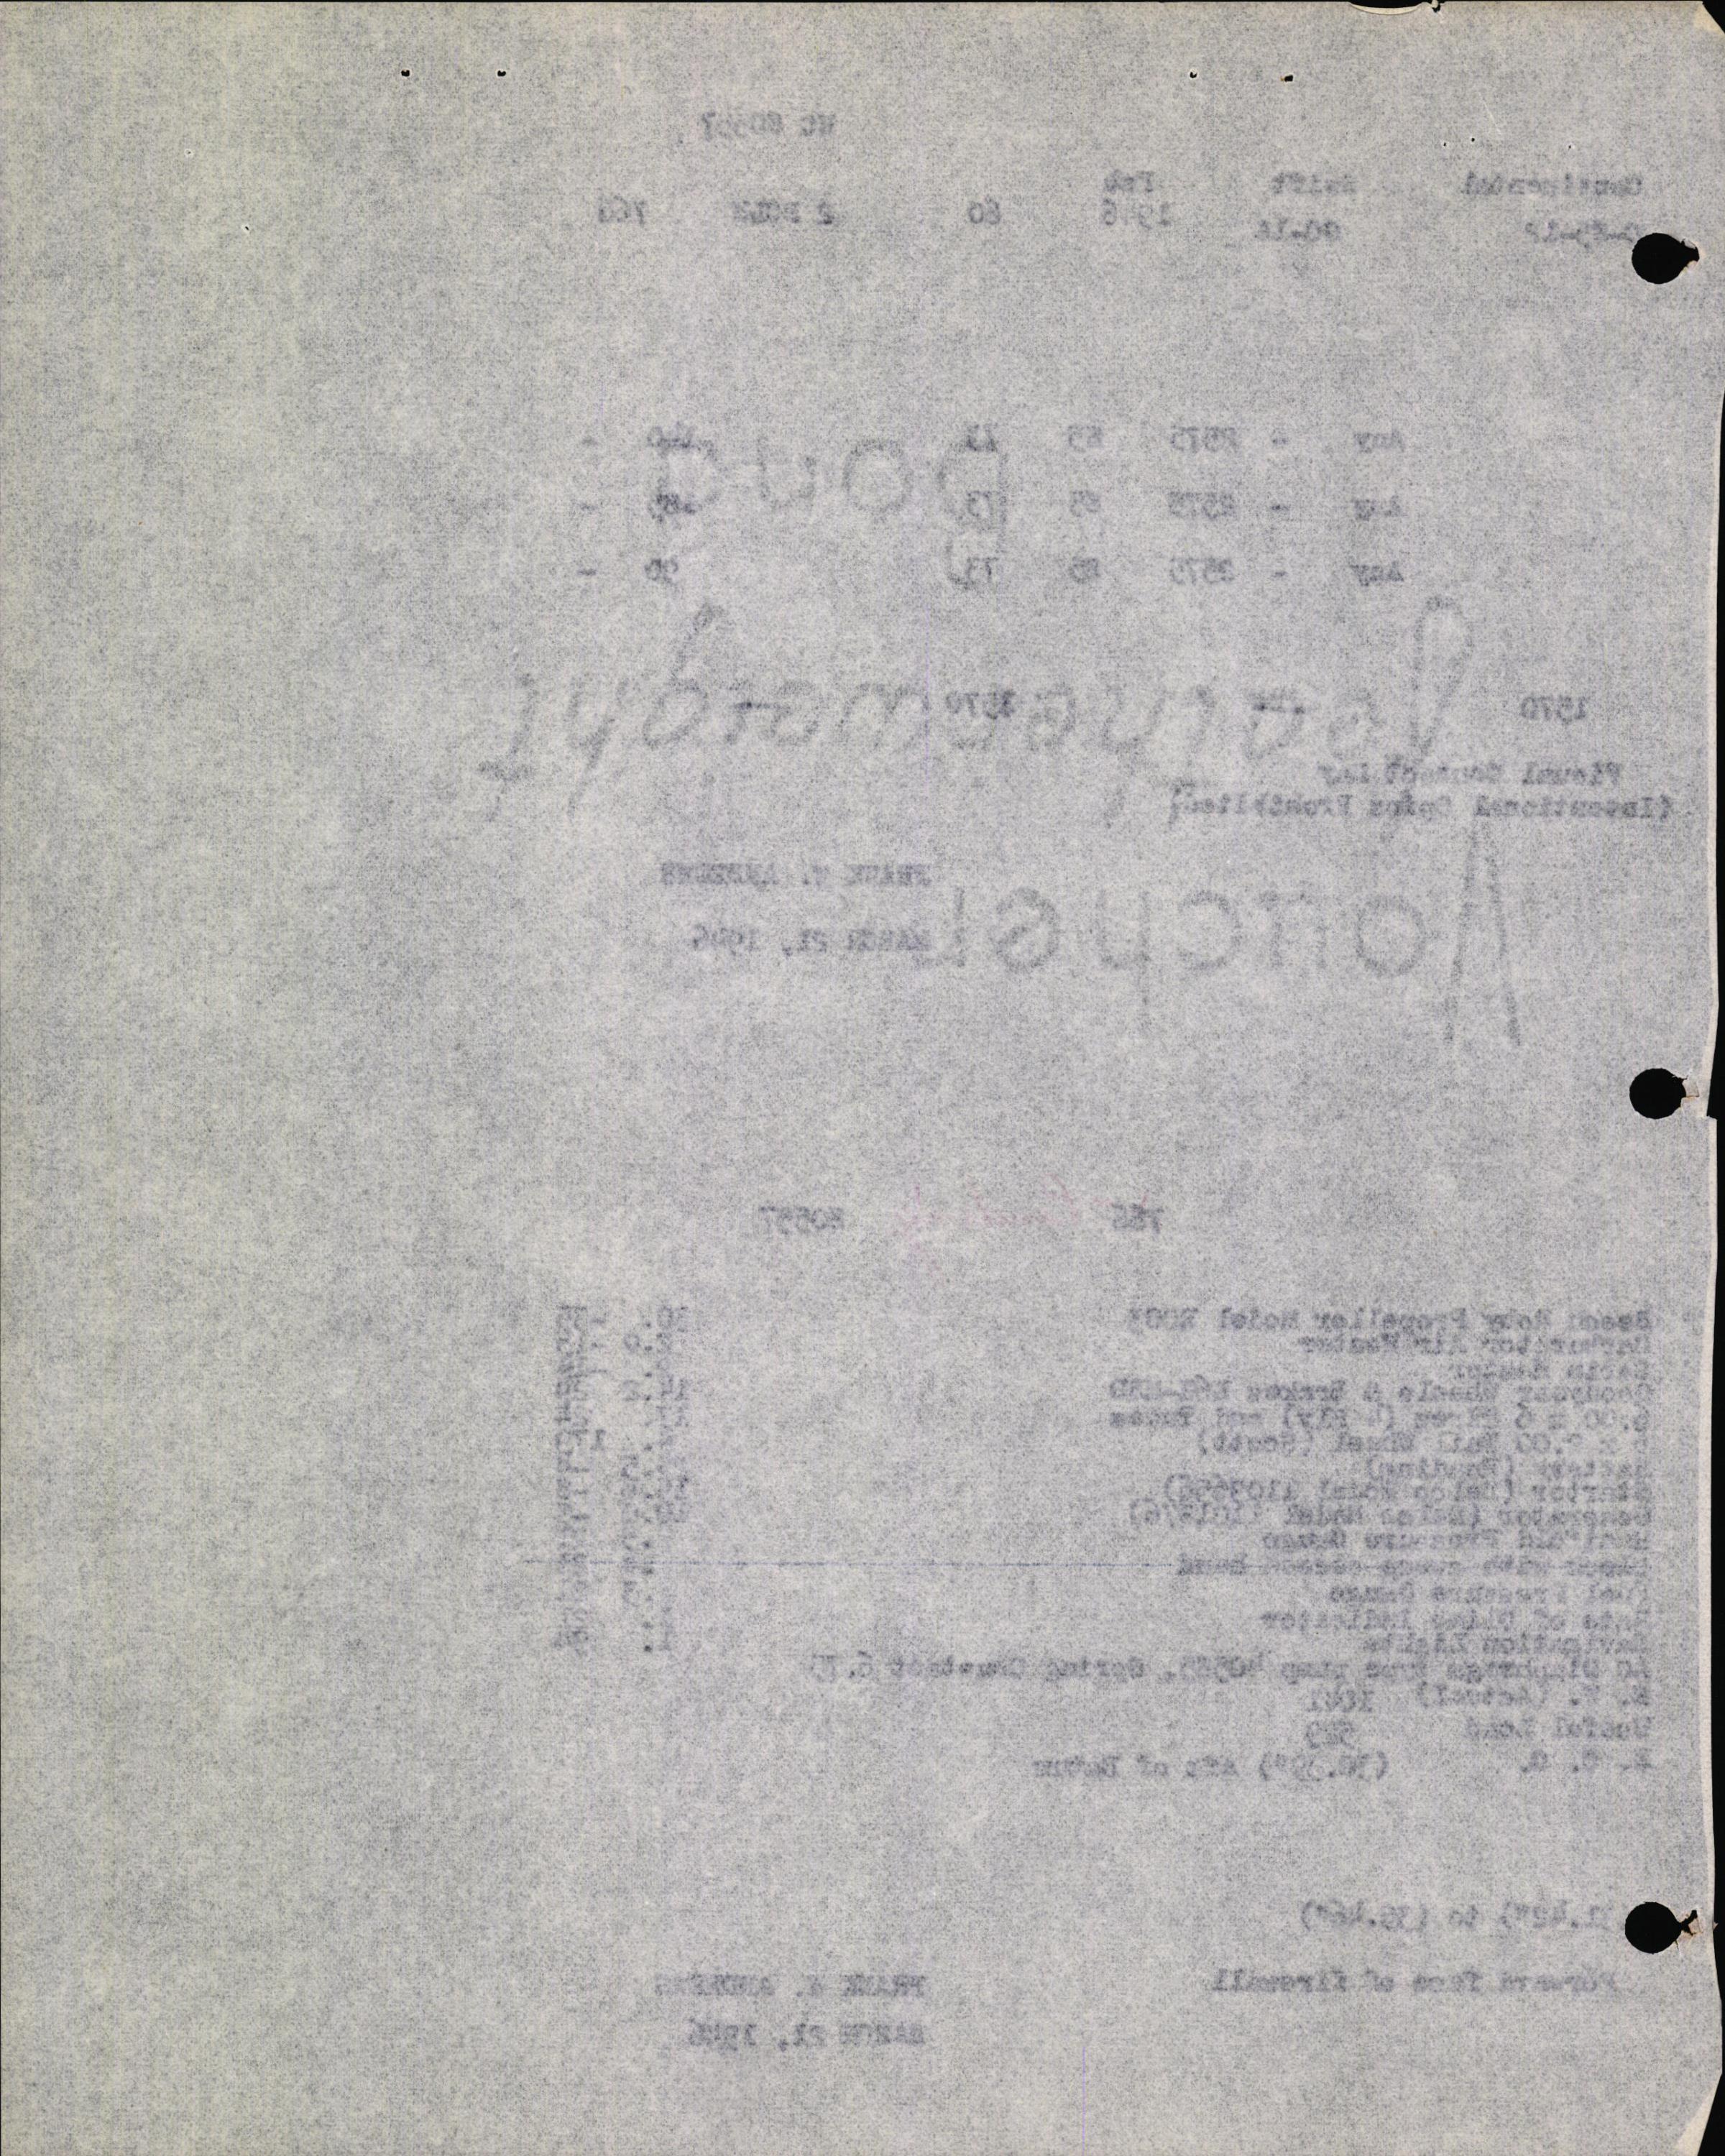 Sample page 6 from AirCorps Library document: Technical Information for Serial Number 60